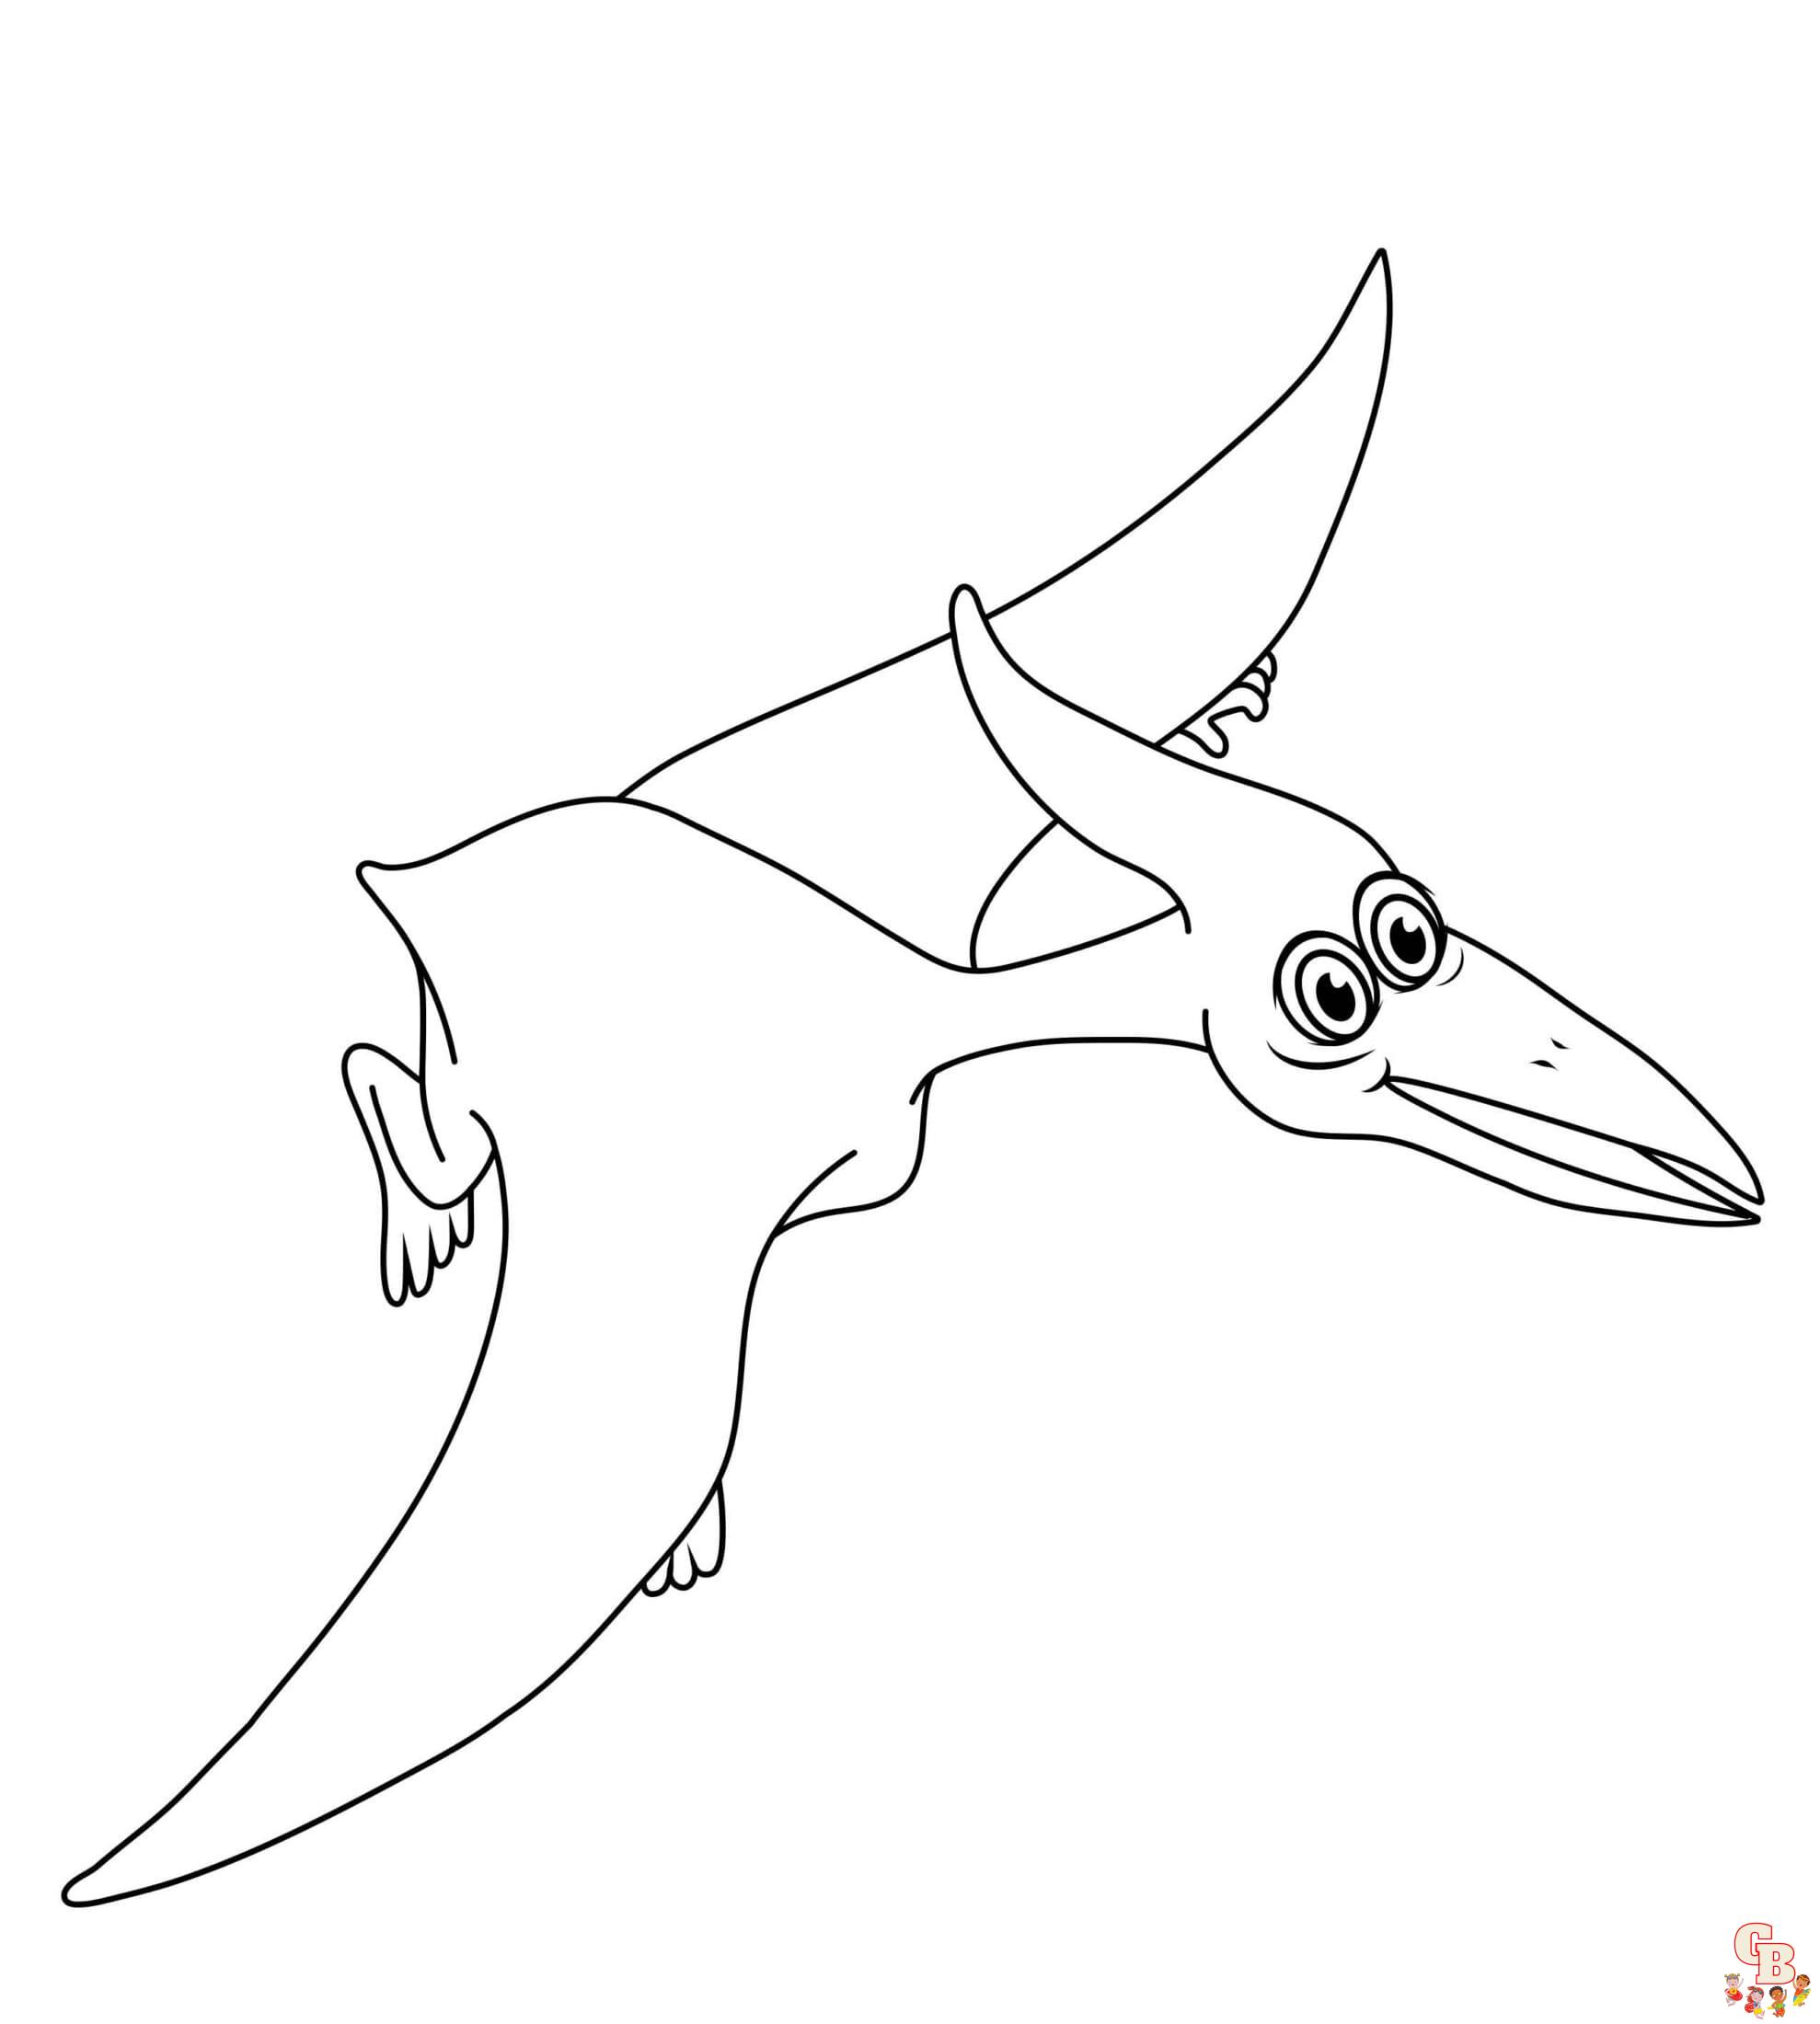 Pteranodon coloring pages to print